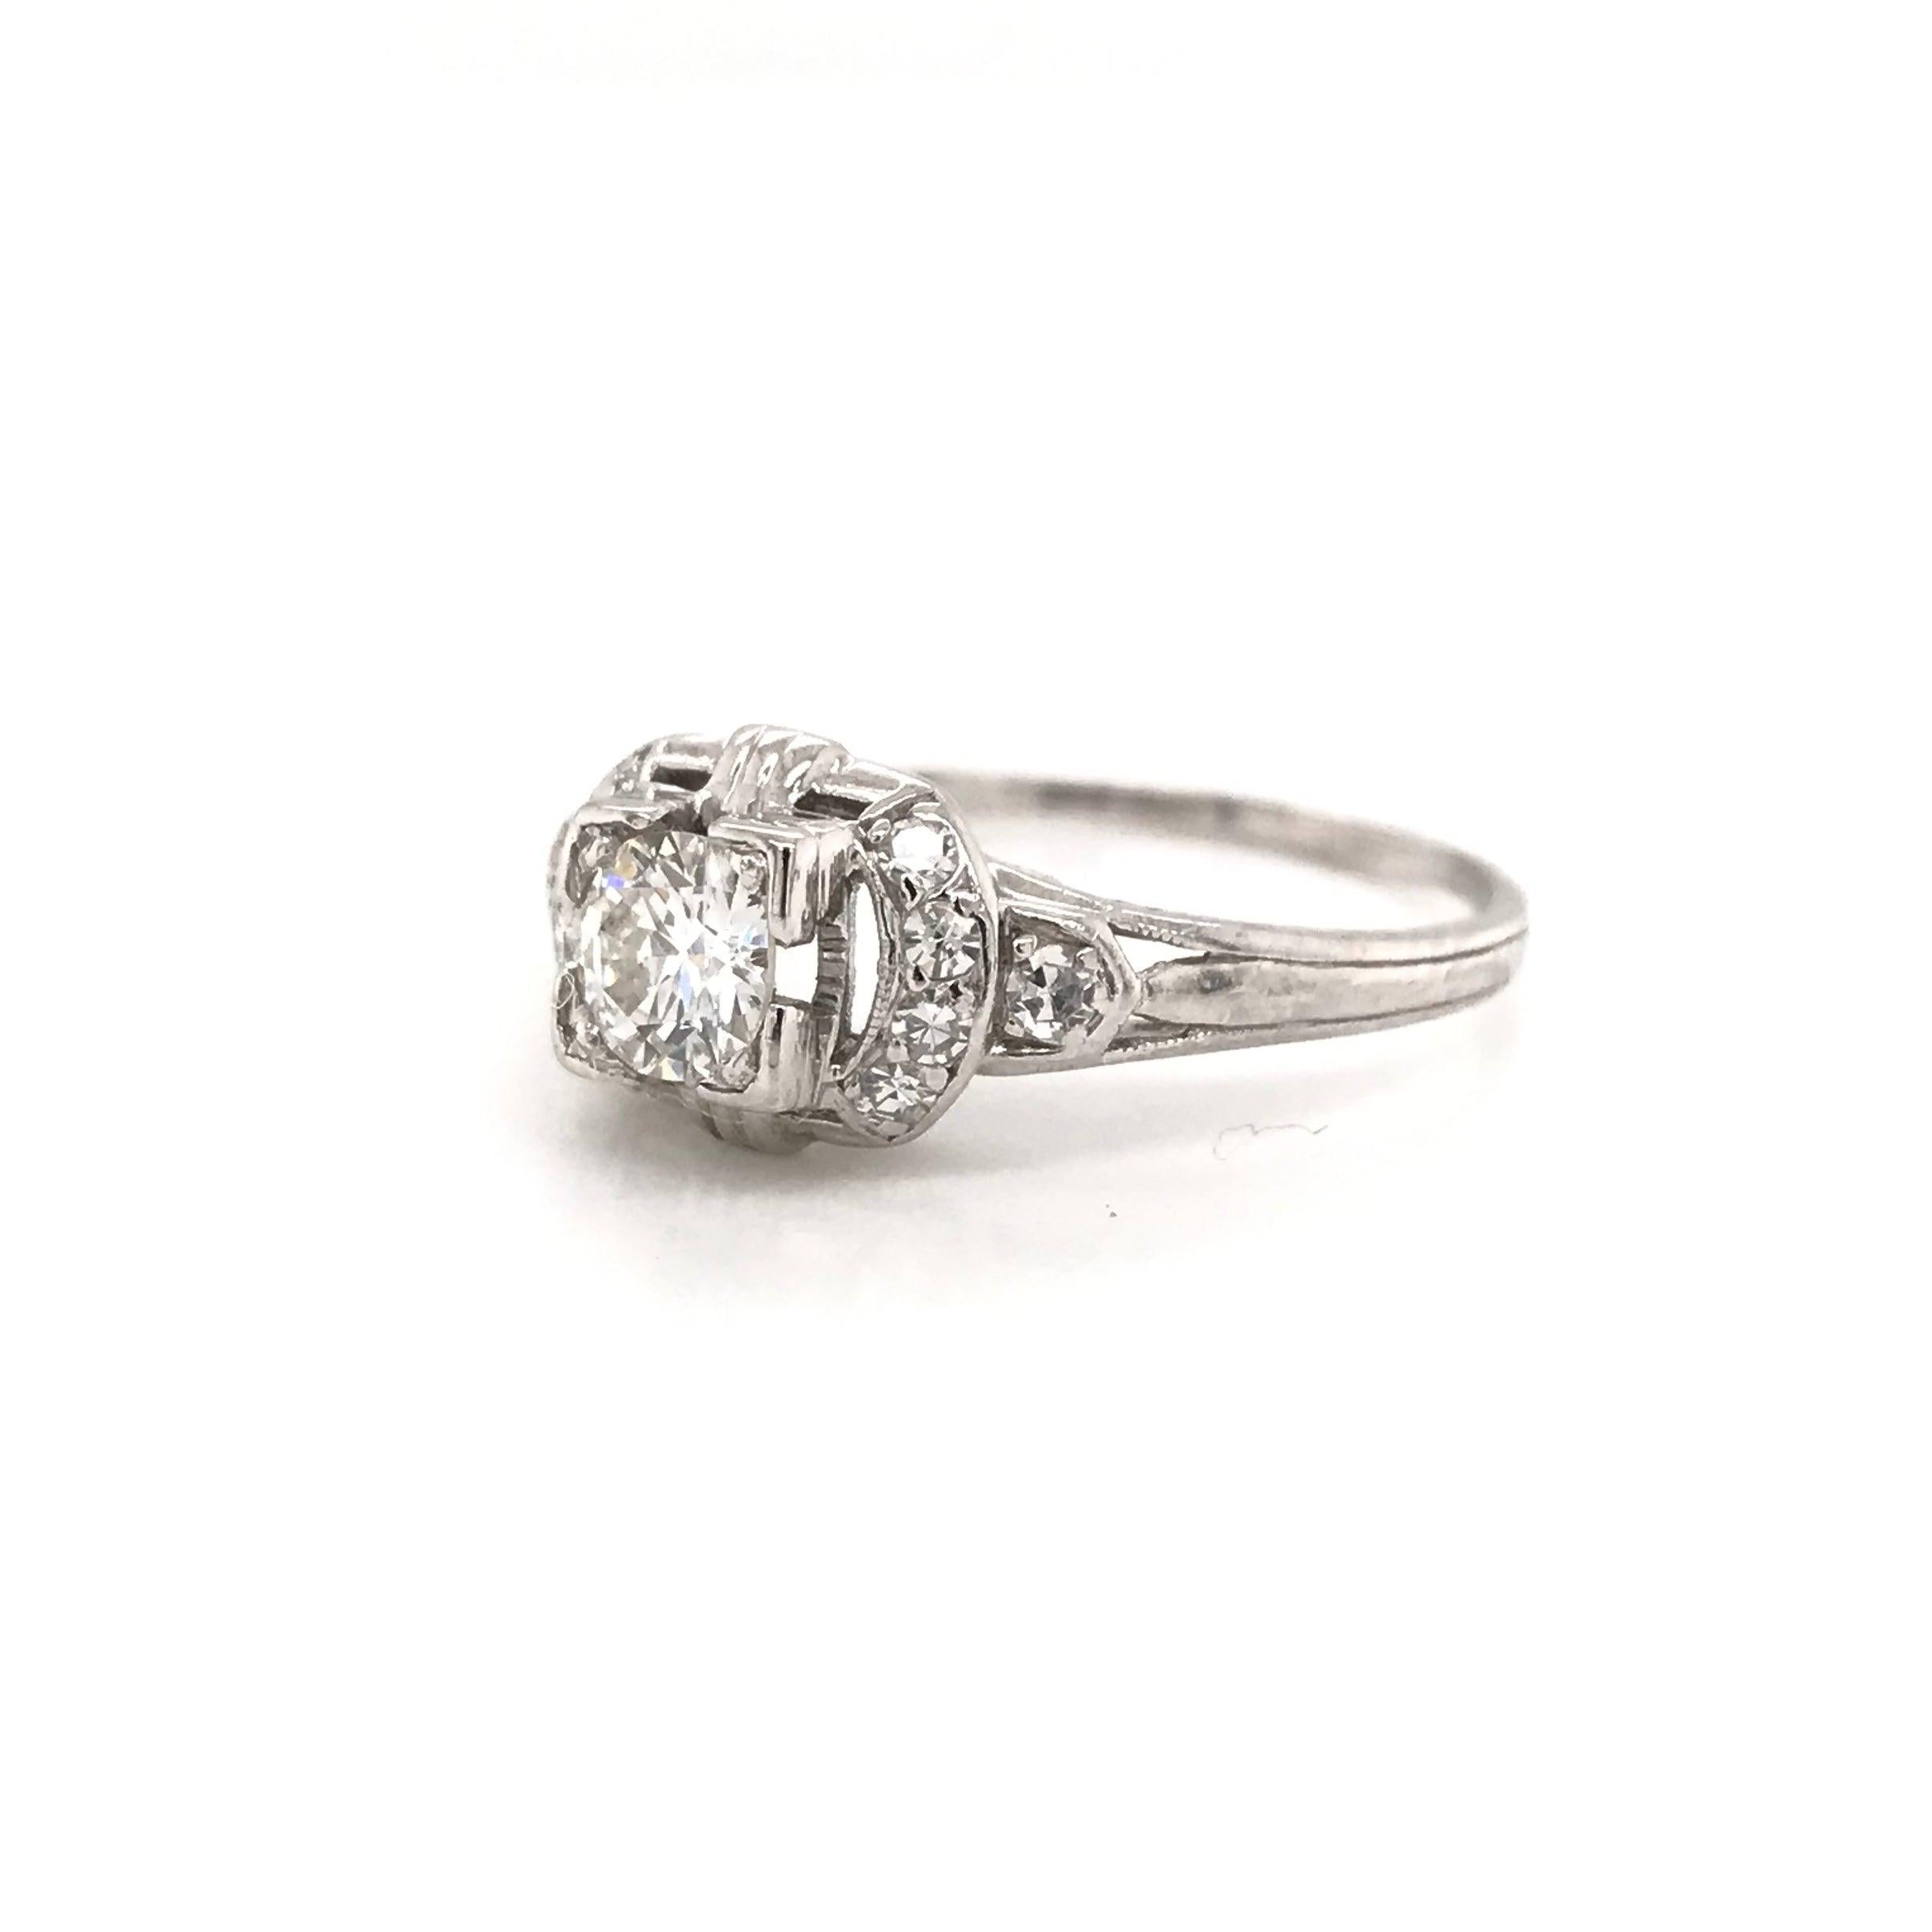 This darling antique piece was handcrafted during the early twentieth century. The dainty platinum setting features a center diamond measuring approximately 0.35 carats ( greater than one third of one carat ). The diamond grades approximately G in